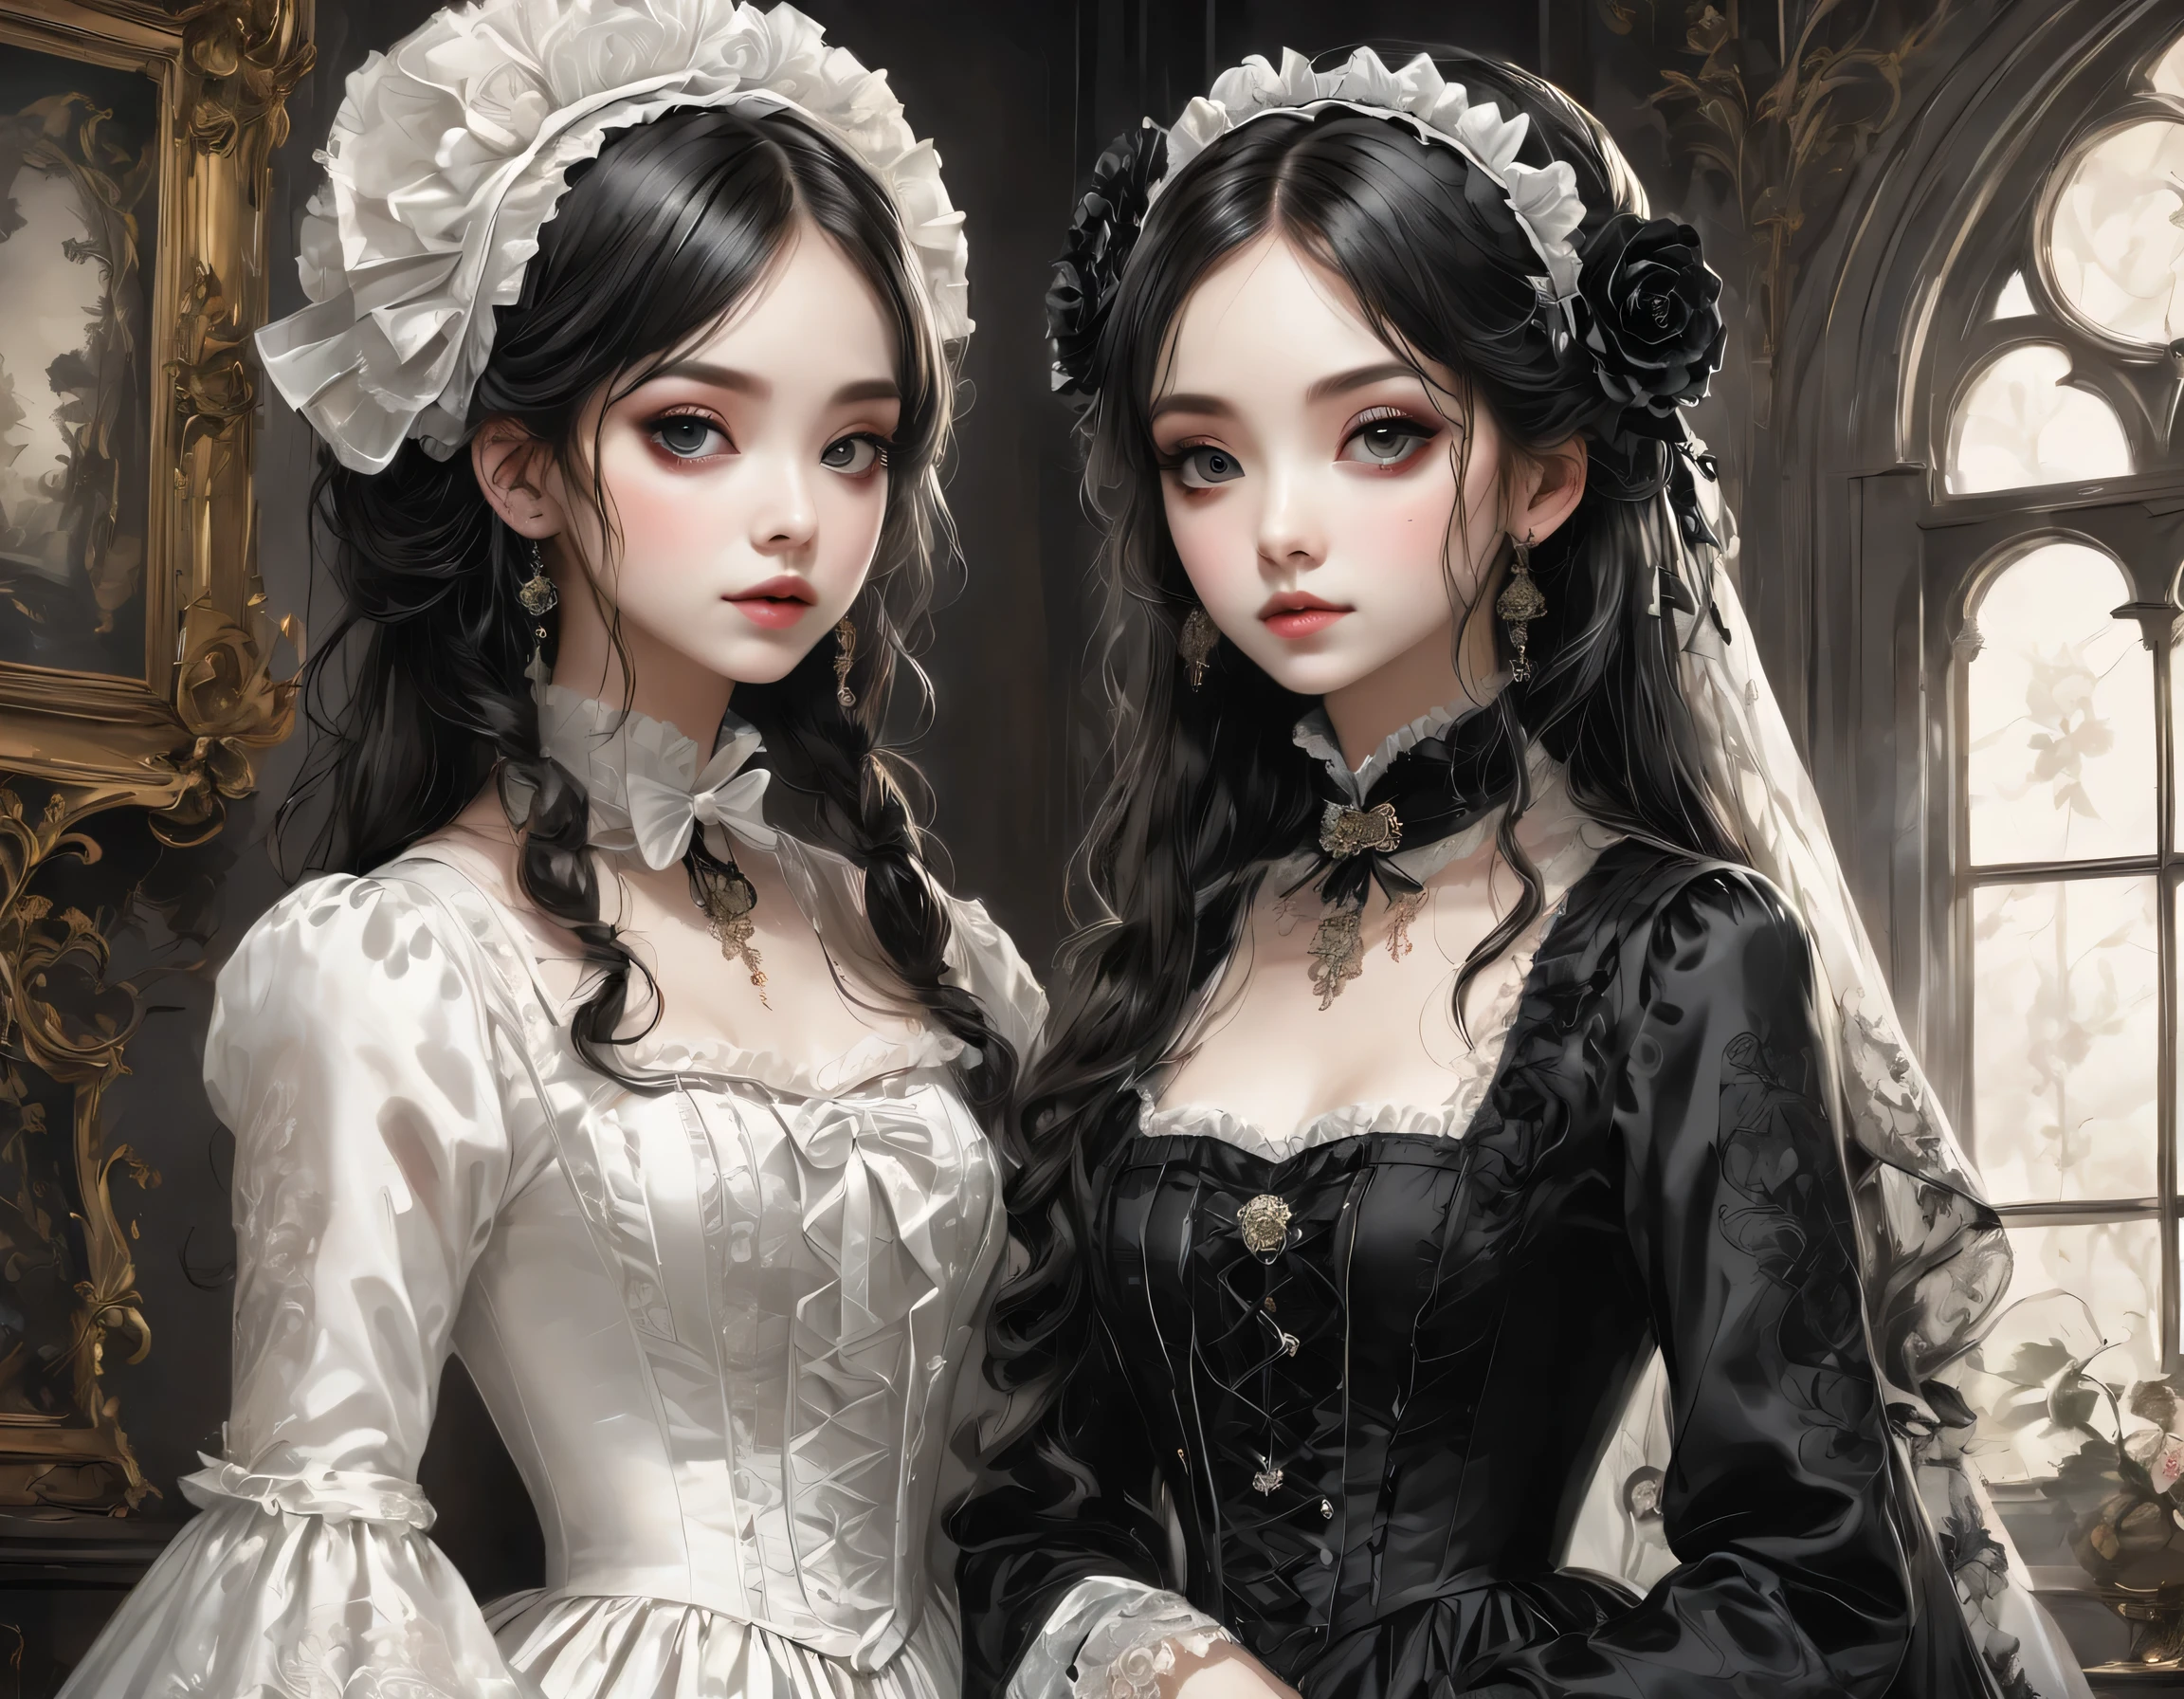 Gothic horror paintings,((Two beautiful girls standing:Symmetric:Gothic Lolita:12 years old:Ephemeral:((Two beautiful girls)):cute:Adorable:Perfect Face:White:eyelash:Big eyes,Smooth Skin)),Gothic House,Looking Back,black and white,scary but beautiful,Gothic Beauty,Expressing beautiful madness,Shrouded in mystery,Placing dark clouds that foreshadow tragedy in a beautiful gothic house,,detailed,Use red as an accent color,Race,embroidery,Detailed pattern,rendering,Designer House,Luxury Homes,nice,quiet,Beautiful light and shadow,Gothic Room,Golden Ratio,Anatomically correct,Rococo,BREAK,(The girl on the right(Black Dress)Gothic Lolita),BREAK,(The girl on the left(White Dress)Gothic Lolita),BREAK,embroidery,Detailed pattern,rendering,Zentangle Elements,Beautiful Gothic Horror,masterpiece,The best masterpiece